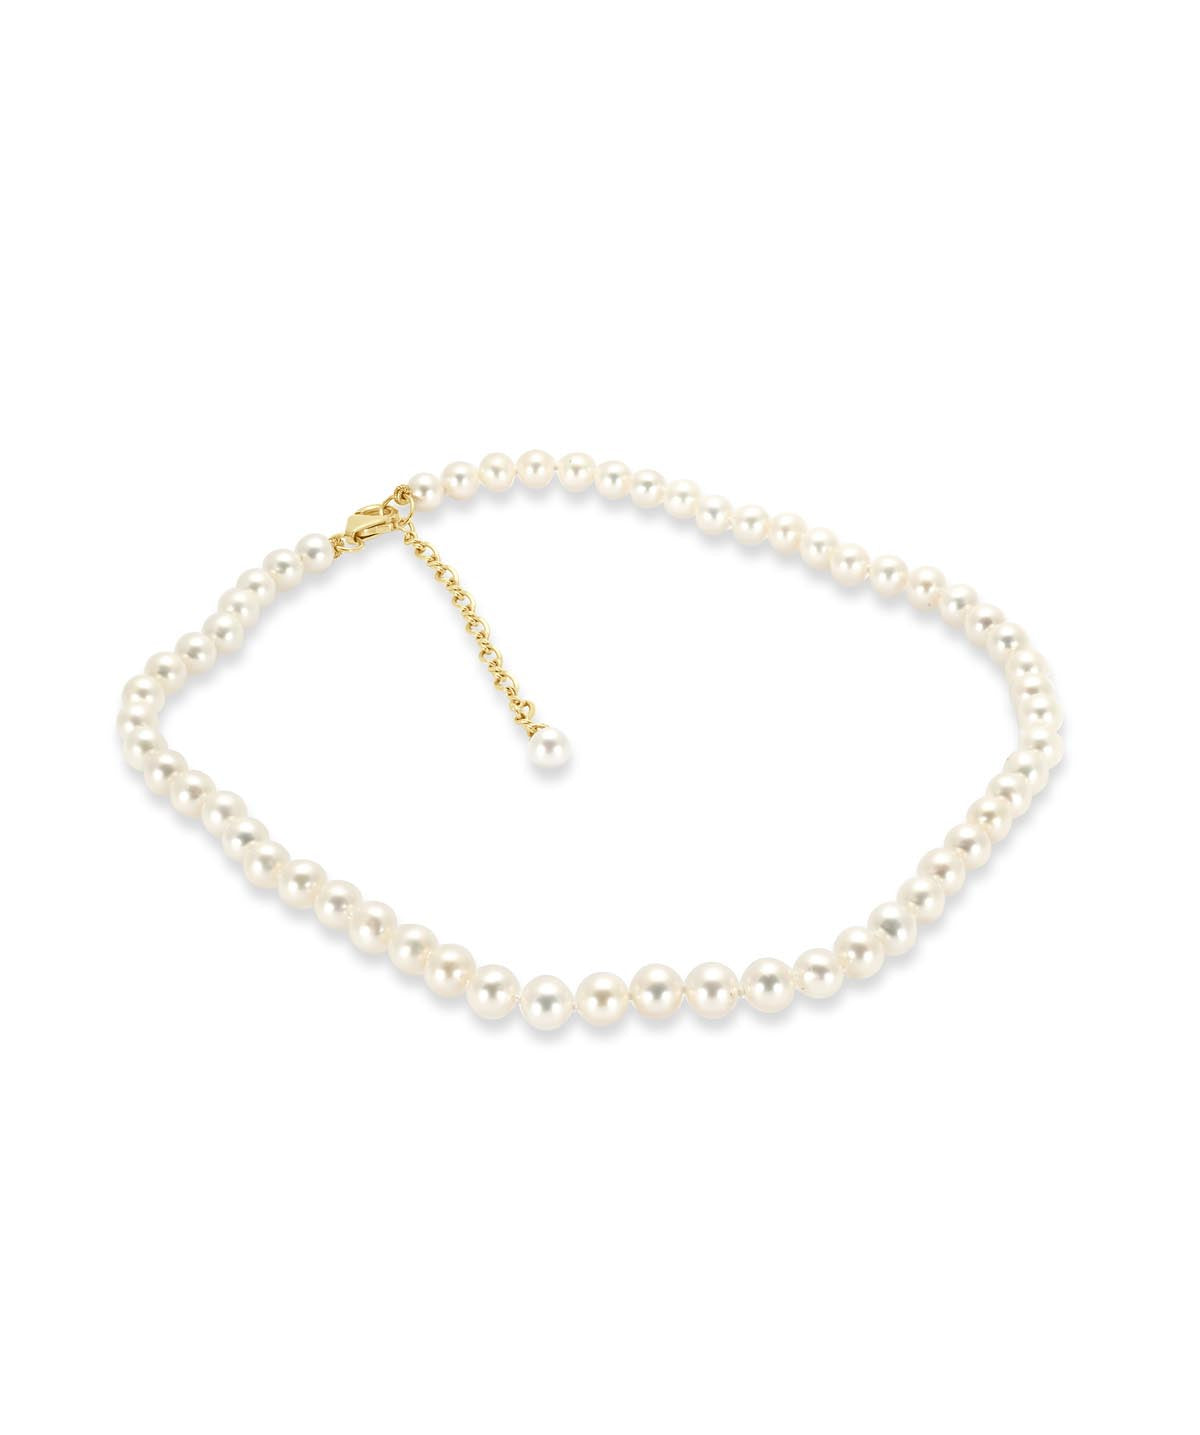 Freshwater Cultured Pearl Single Strand Necklace with 14K Yellow Gold Clasp